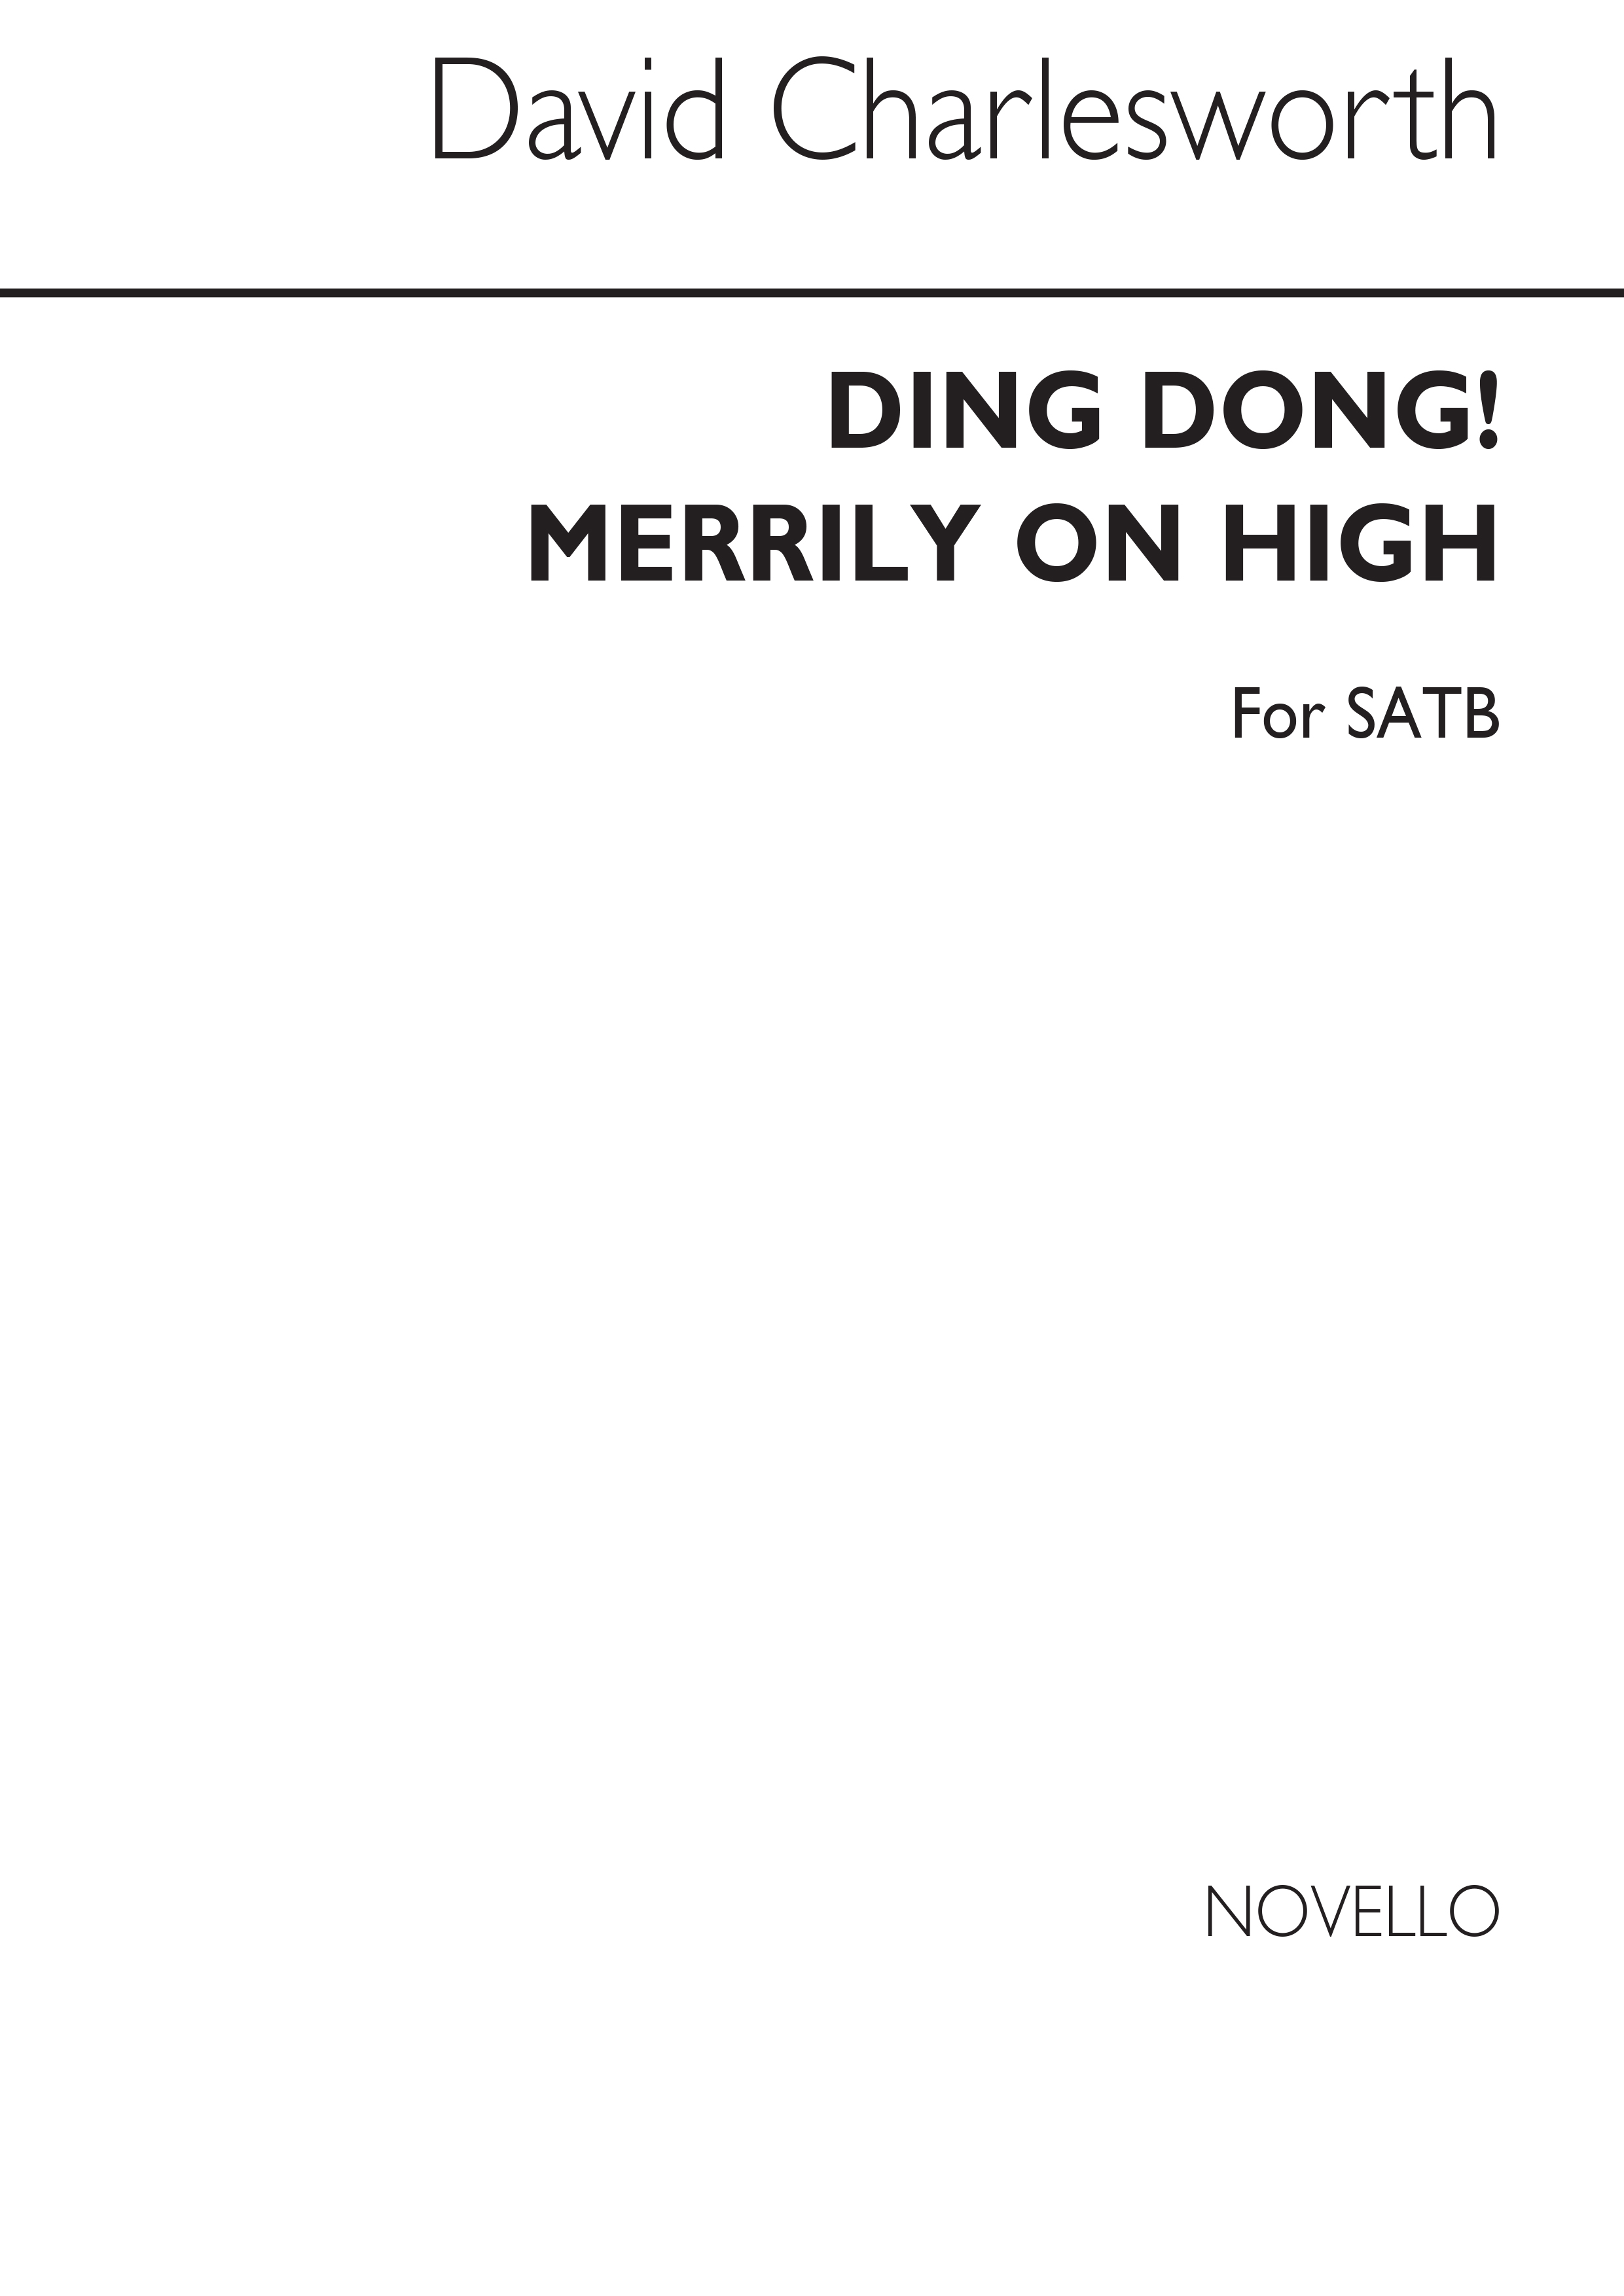 Charlesworth: Ding Dong! Merrily On High for SATB